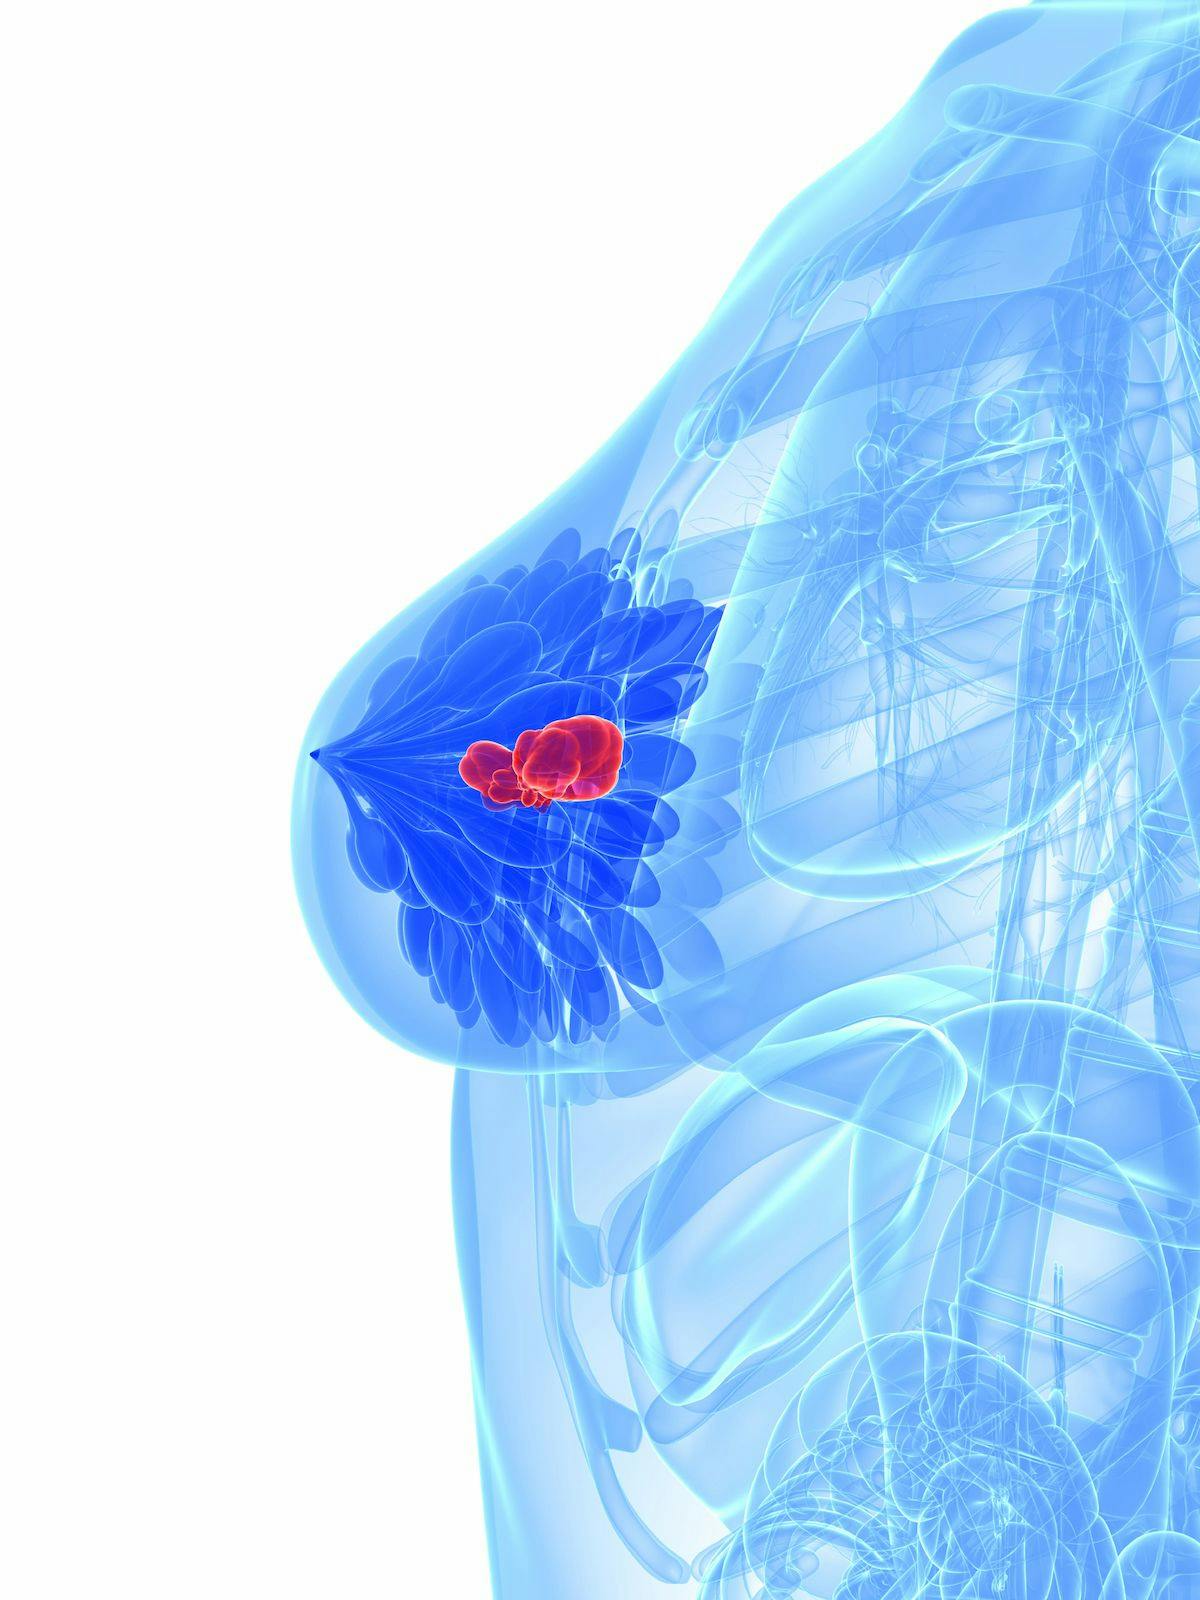 It is believed that Paige Breast Lymph Node can efficiently detect suspicious areas of potential breast cancer metastasis, identify breast cancer micro-metastases and isolated tumor cells in lymph node tissue, and enhance diagnostic accuracy and confidence.